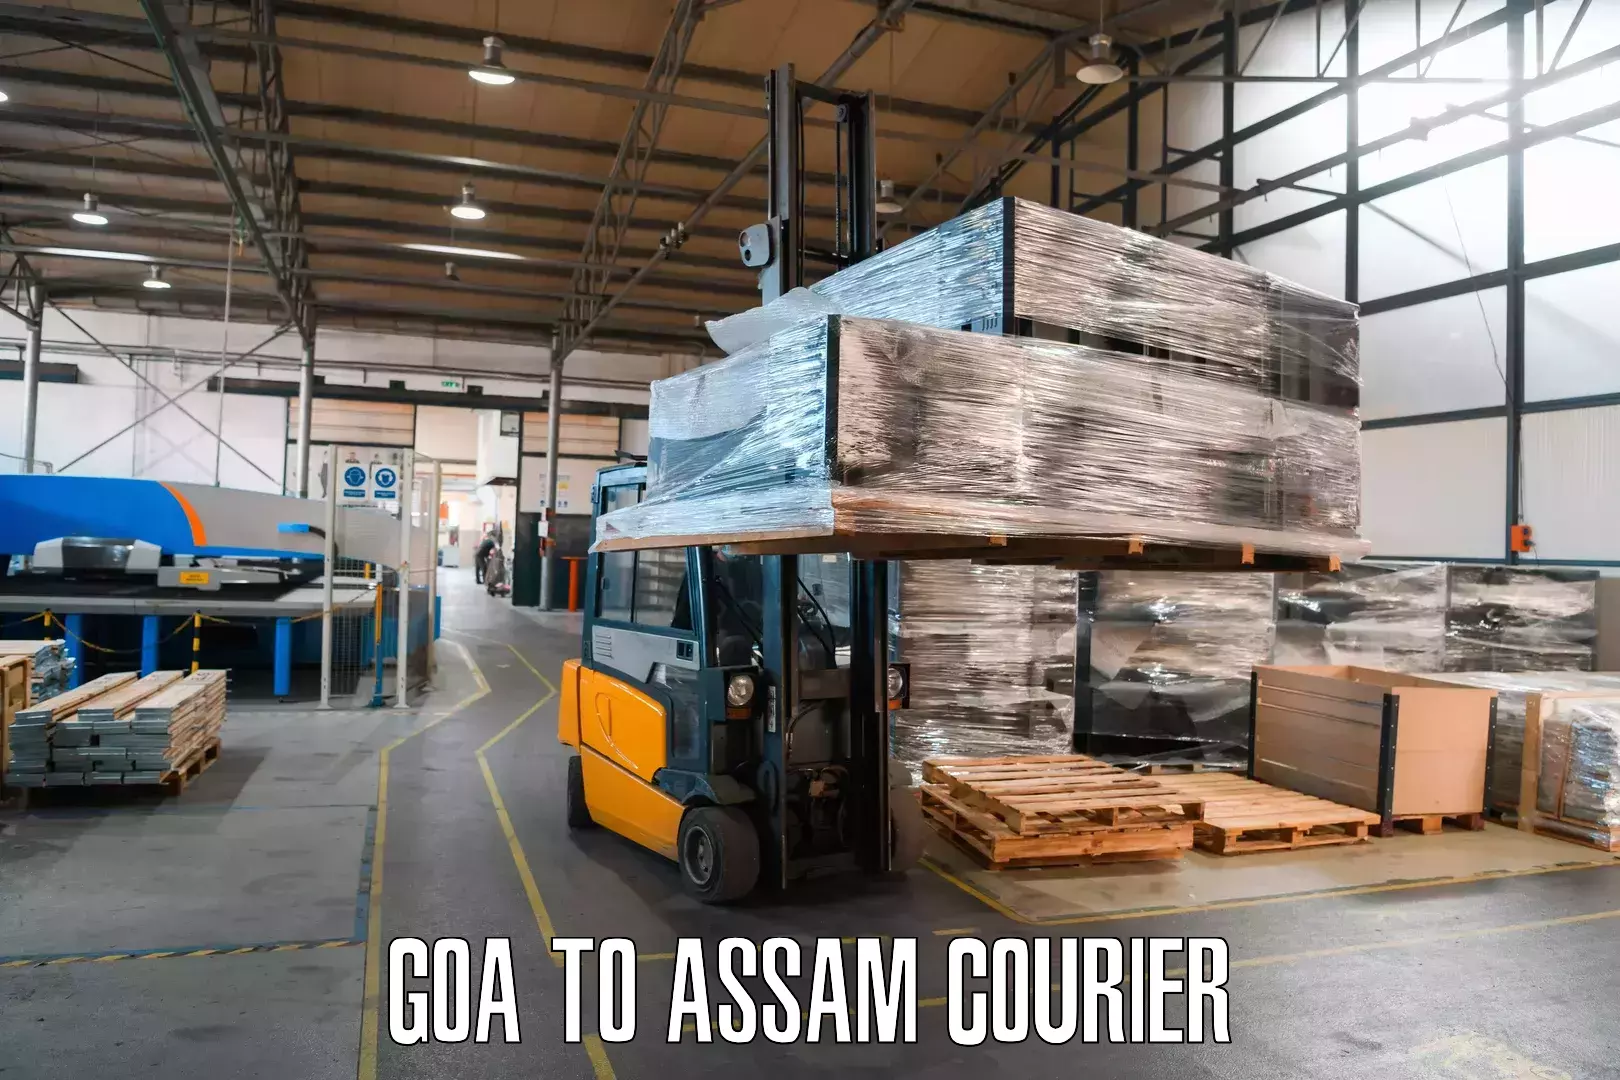 Delivery service partnership Goa to Assam